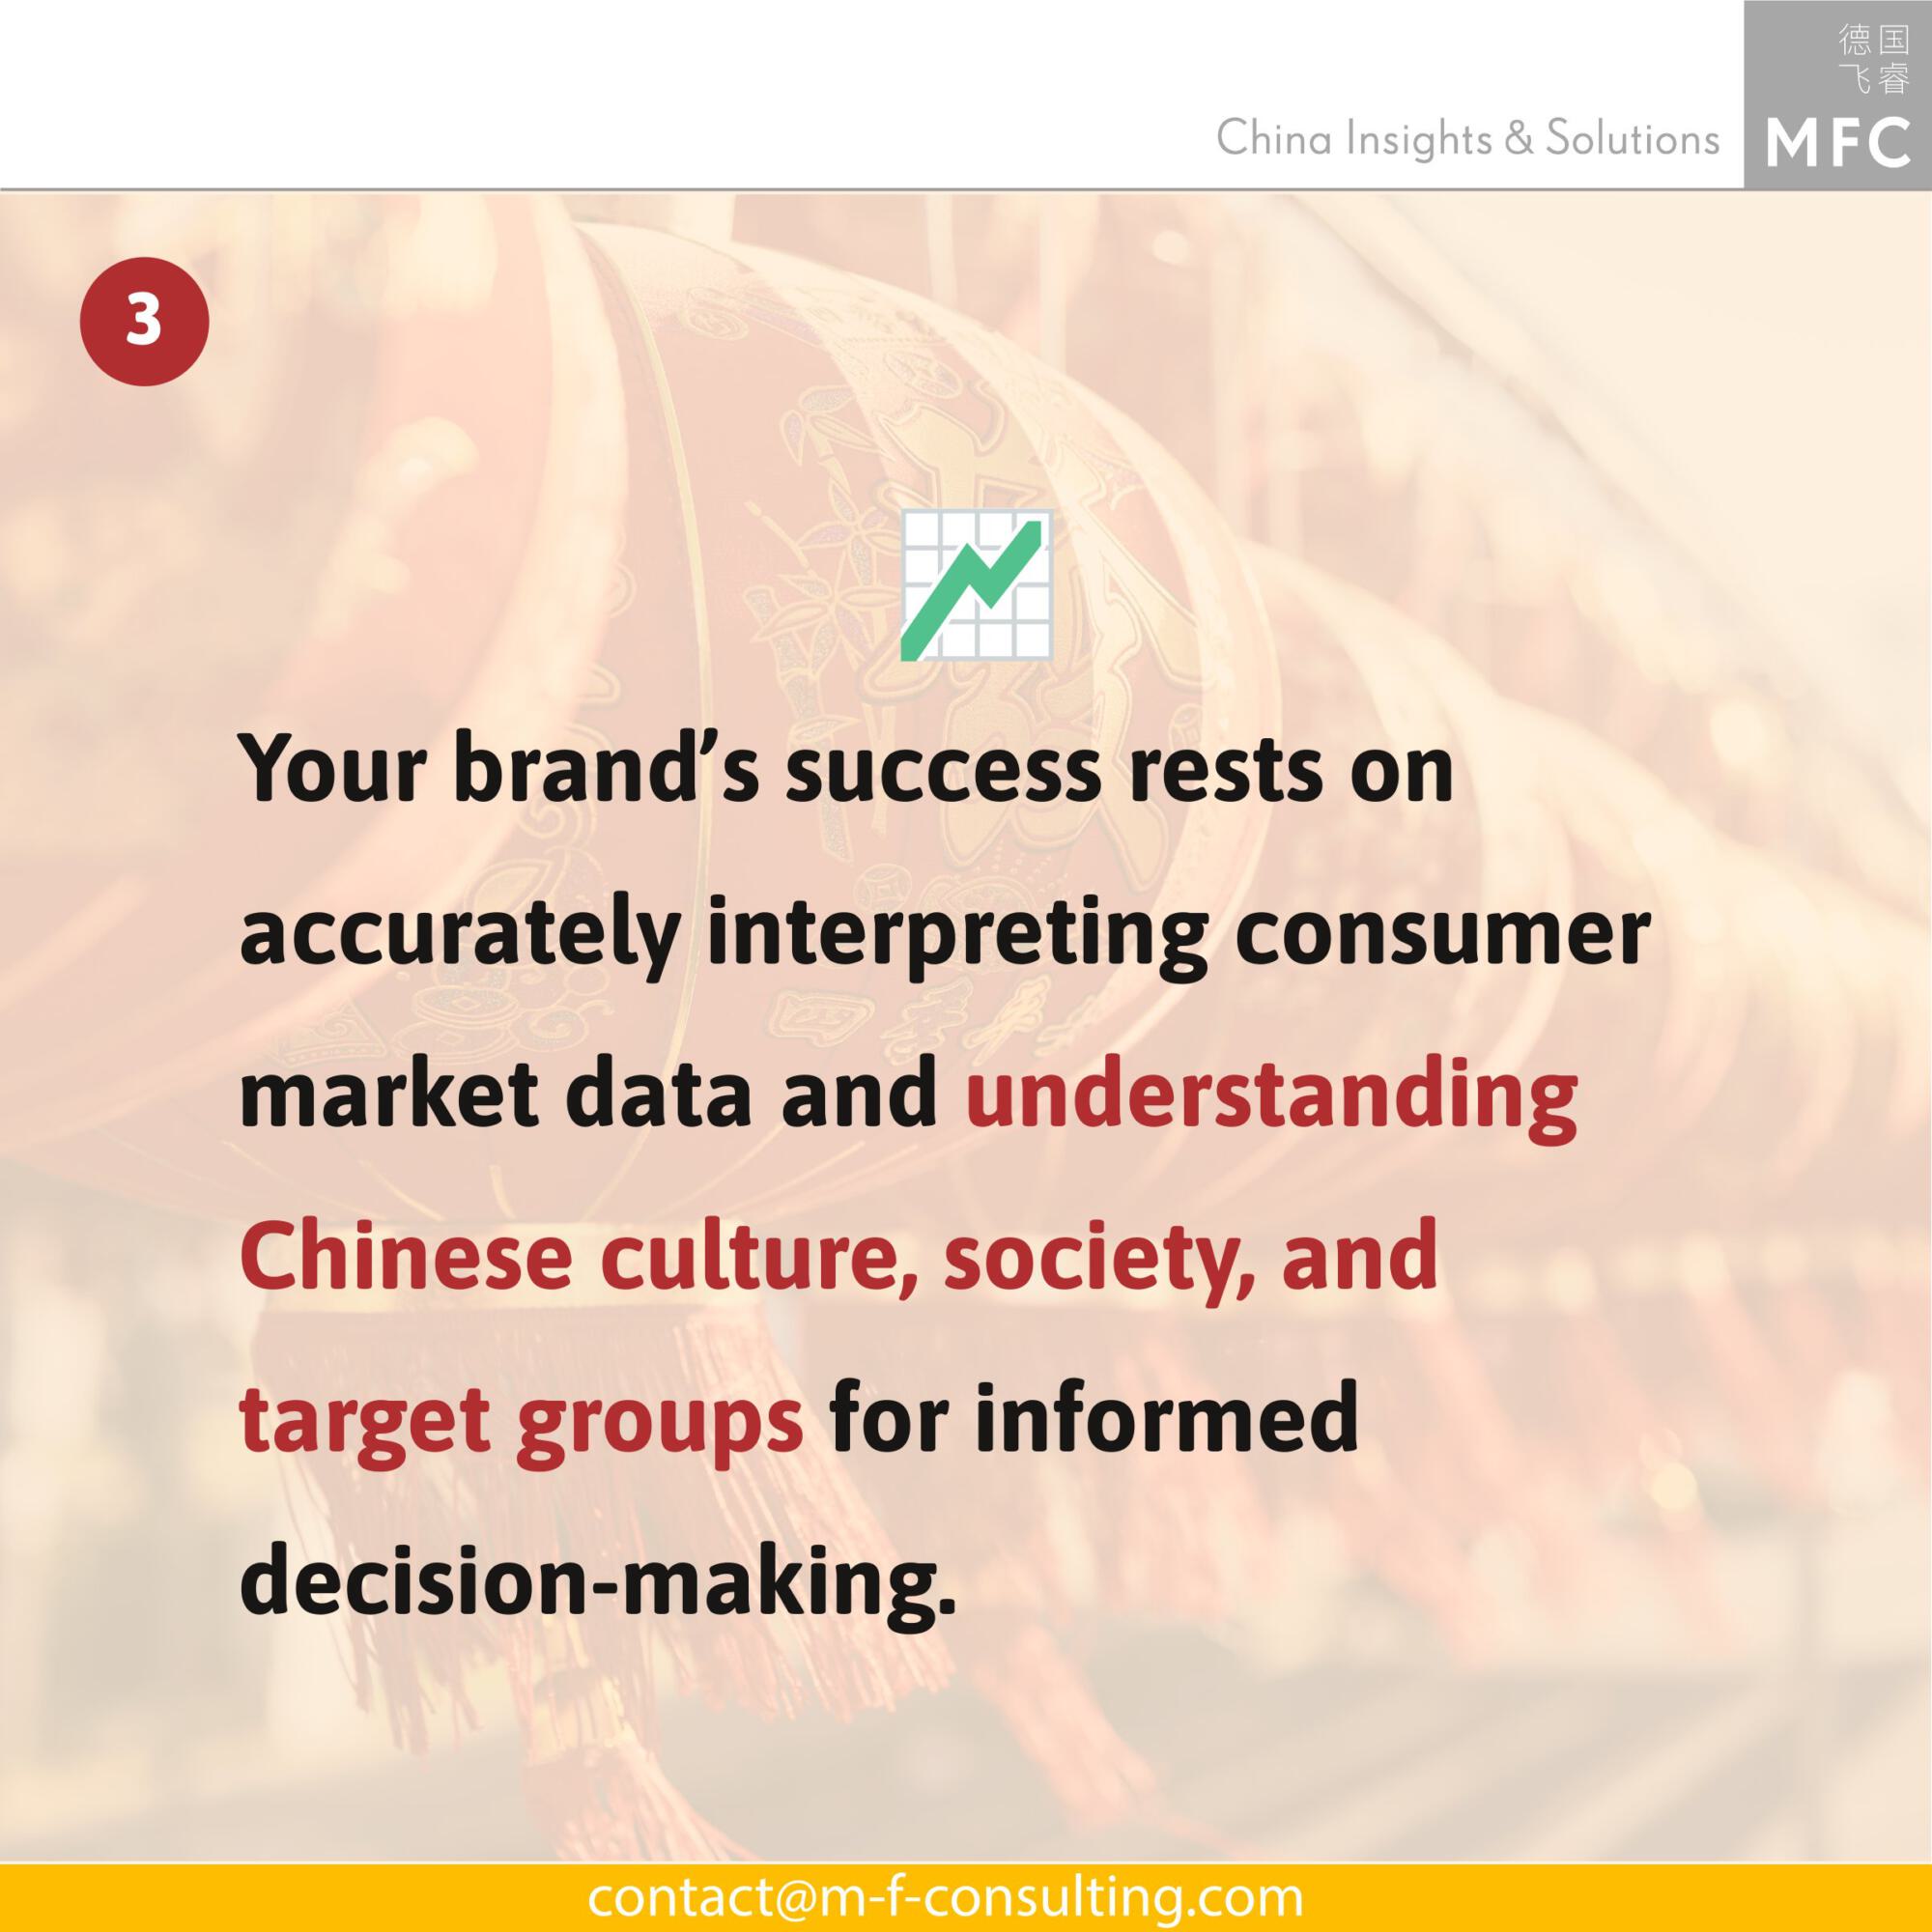 Your brand's success rests on accurately interpreting consumer market data and understanding Chinese culture, society and target groups for informed decision-making.